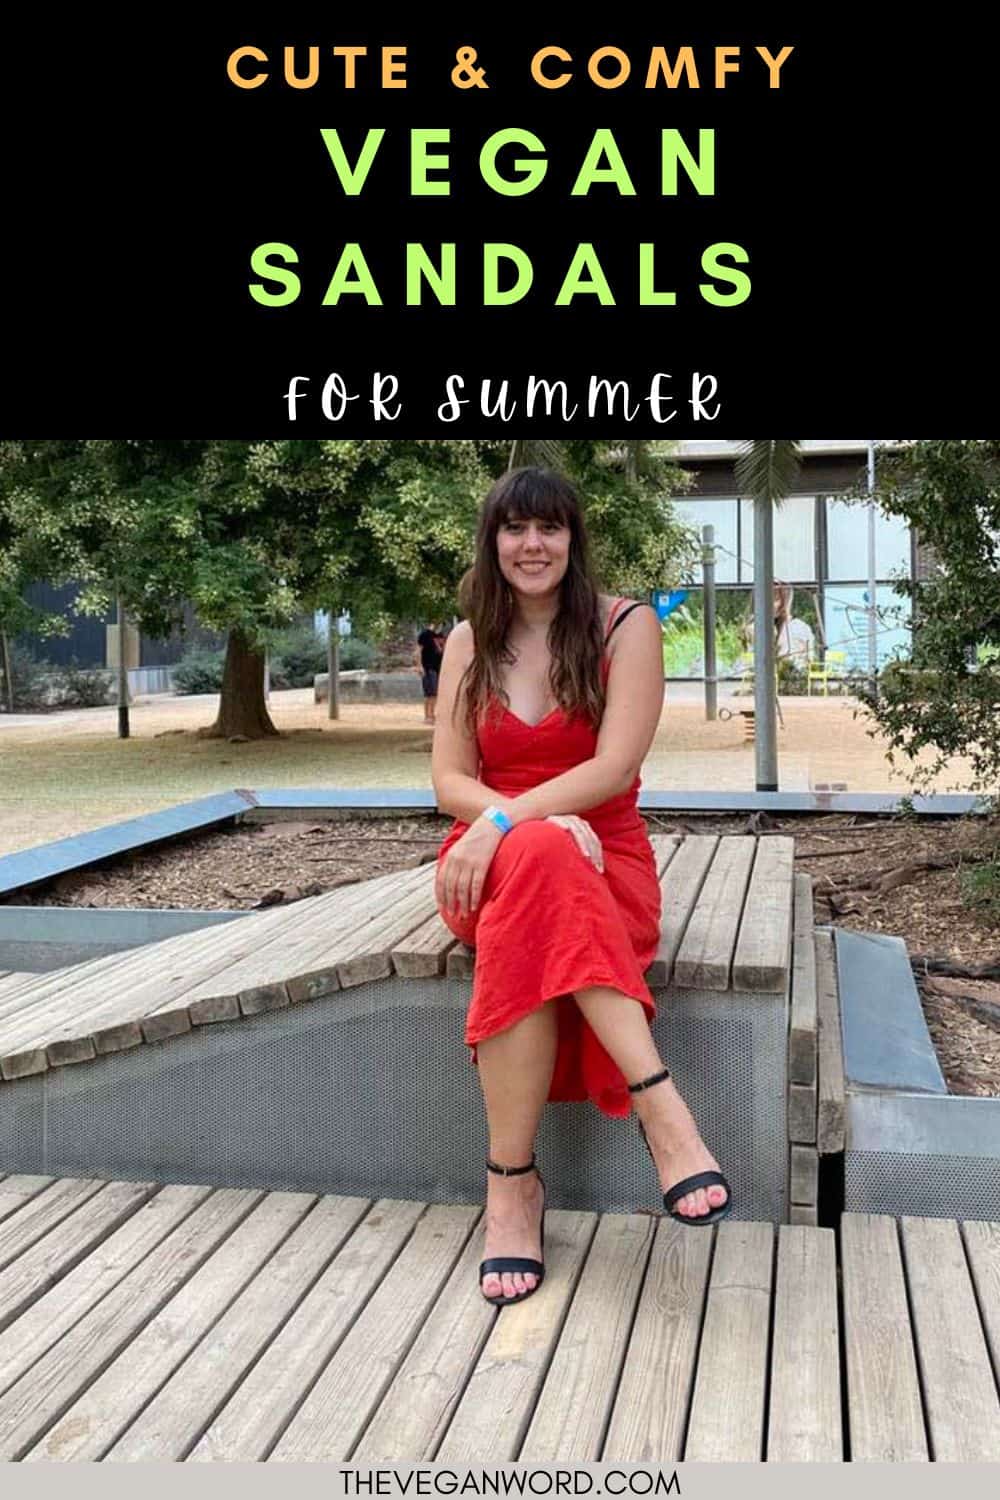 Pinterest image of the author sitting on a bench wearing veerah vegan sandals with text that reads "cute & comfy vegan sandals for summer"